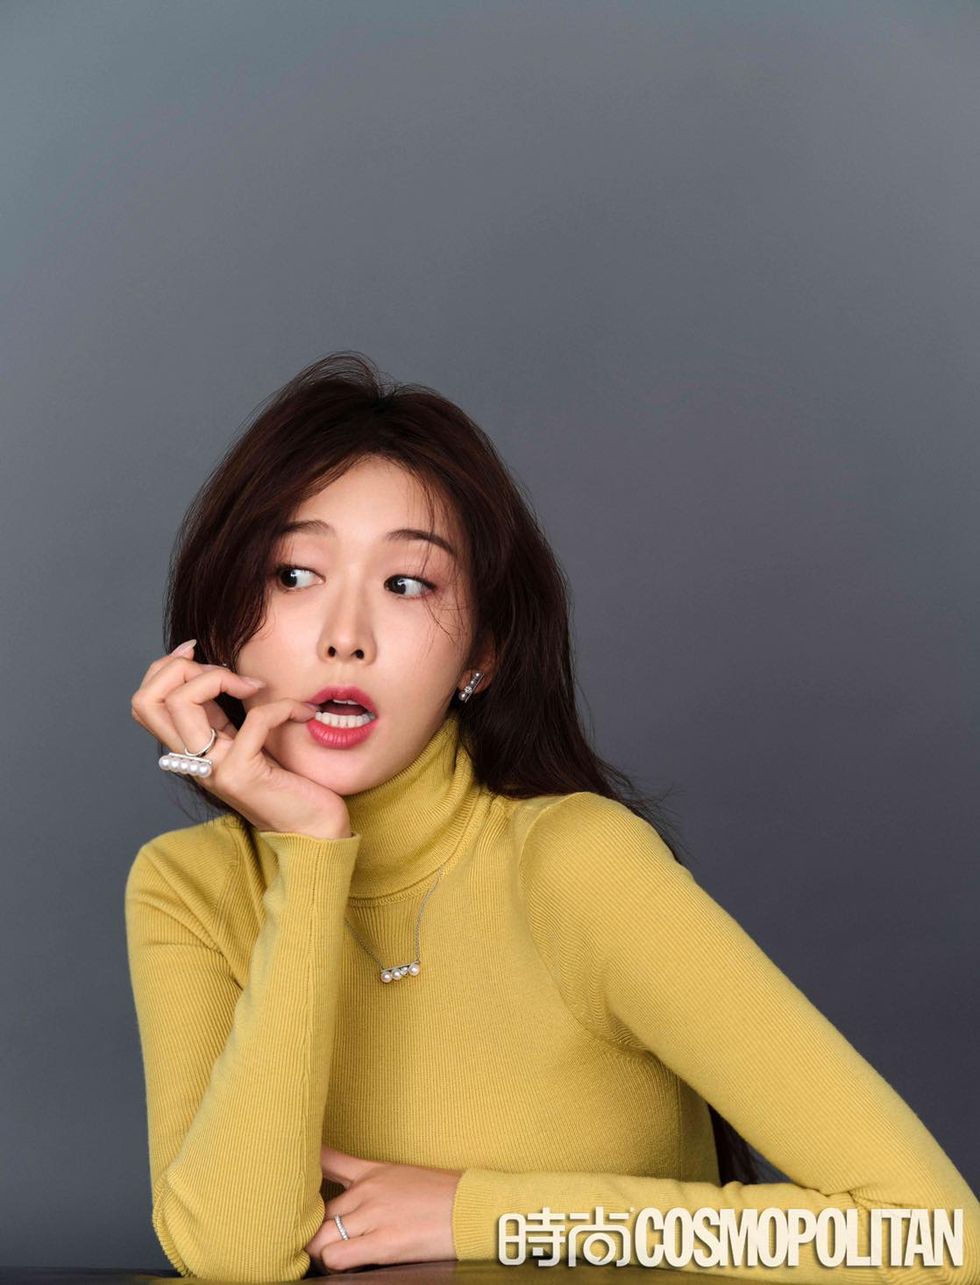 Yellow, Beauty, Chin, Lip, Forehead, Neck, Photography, Mouth, Sitting, Gesture, 